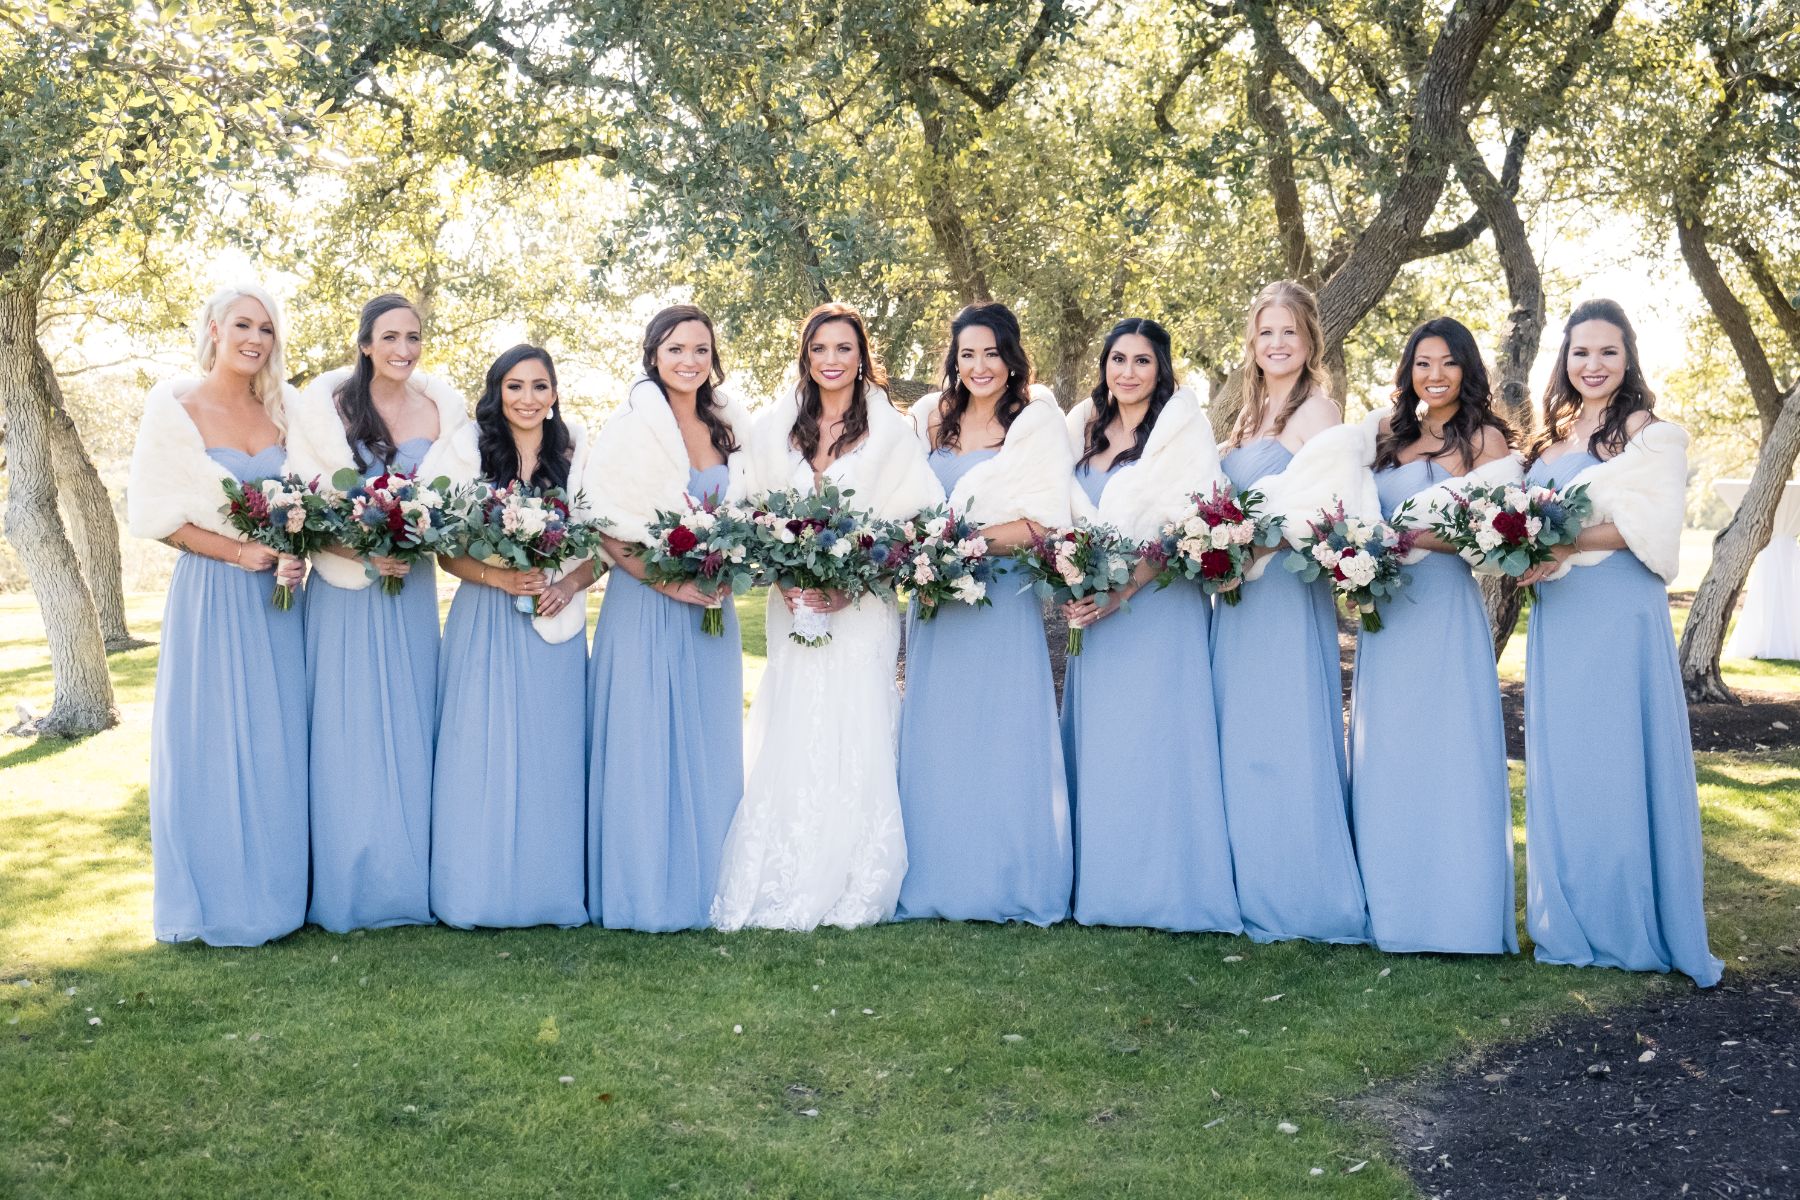 Nine. Bridesmaids wearing blue long dresses and white for shawls surround a bride. The bride and bridesmaids are standing in a line with oak trees behind them at Canyonwood Ridge Wedding venue.